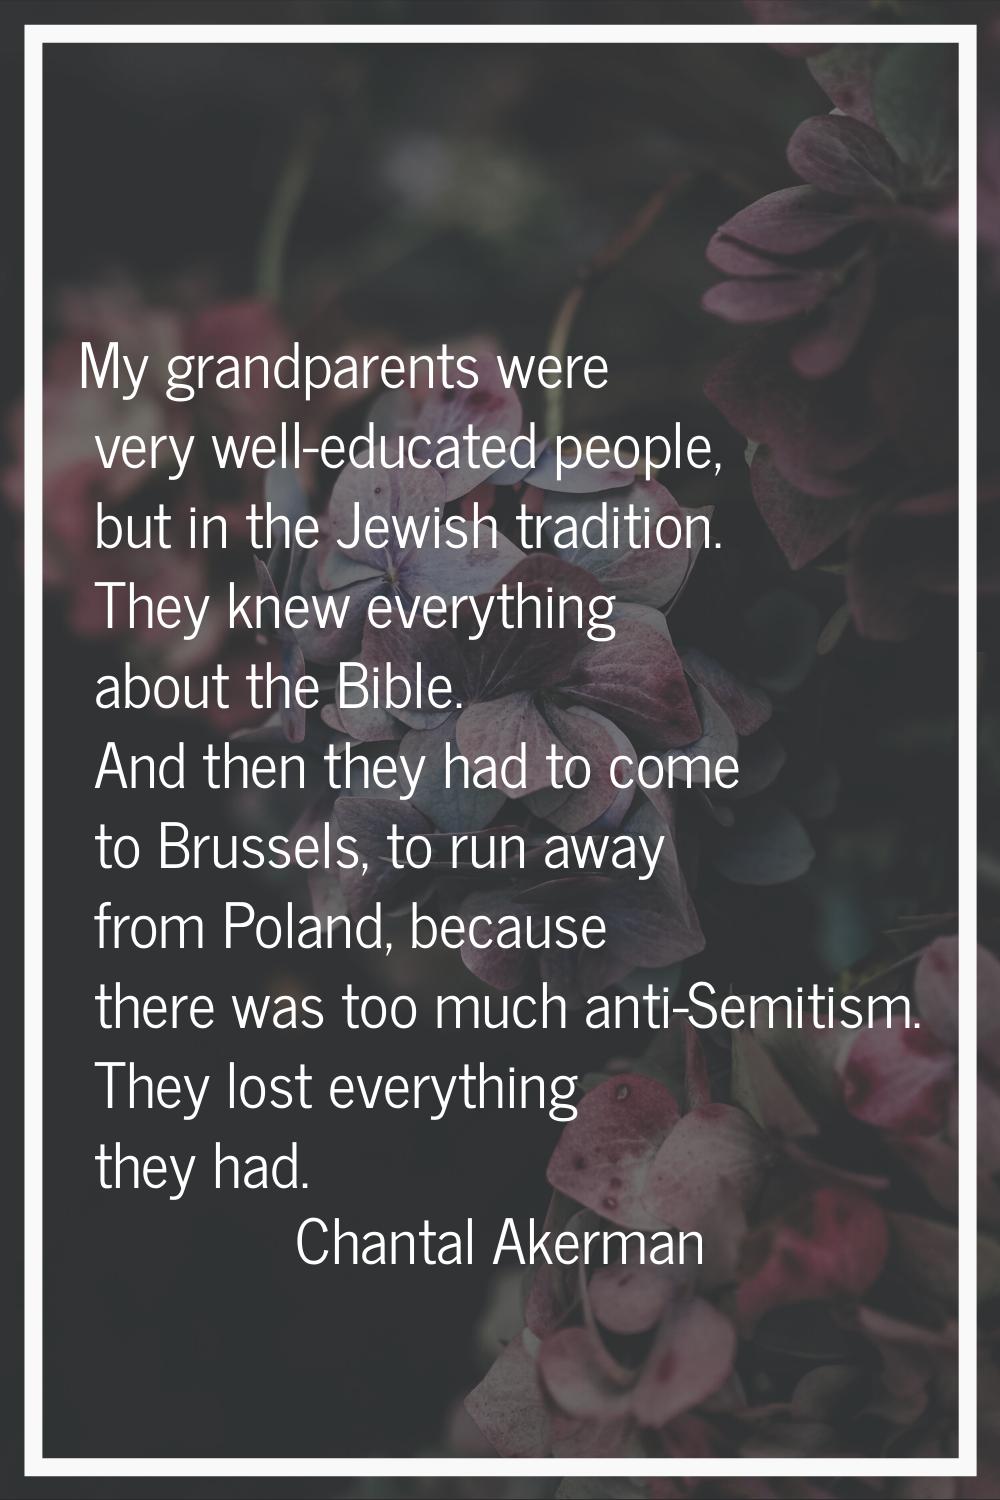 My grandparents were very well-educated people, but in the Jewish tradition. They knew everything a